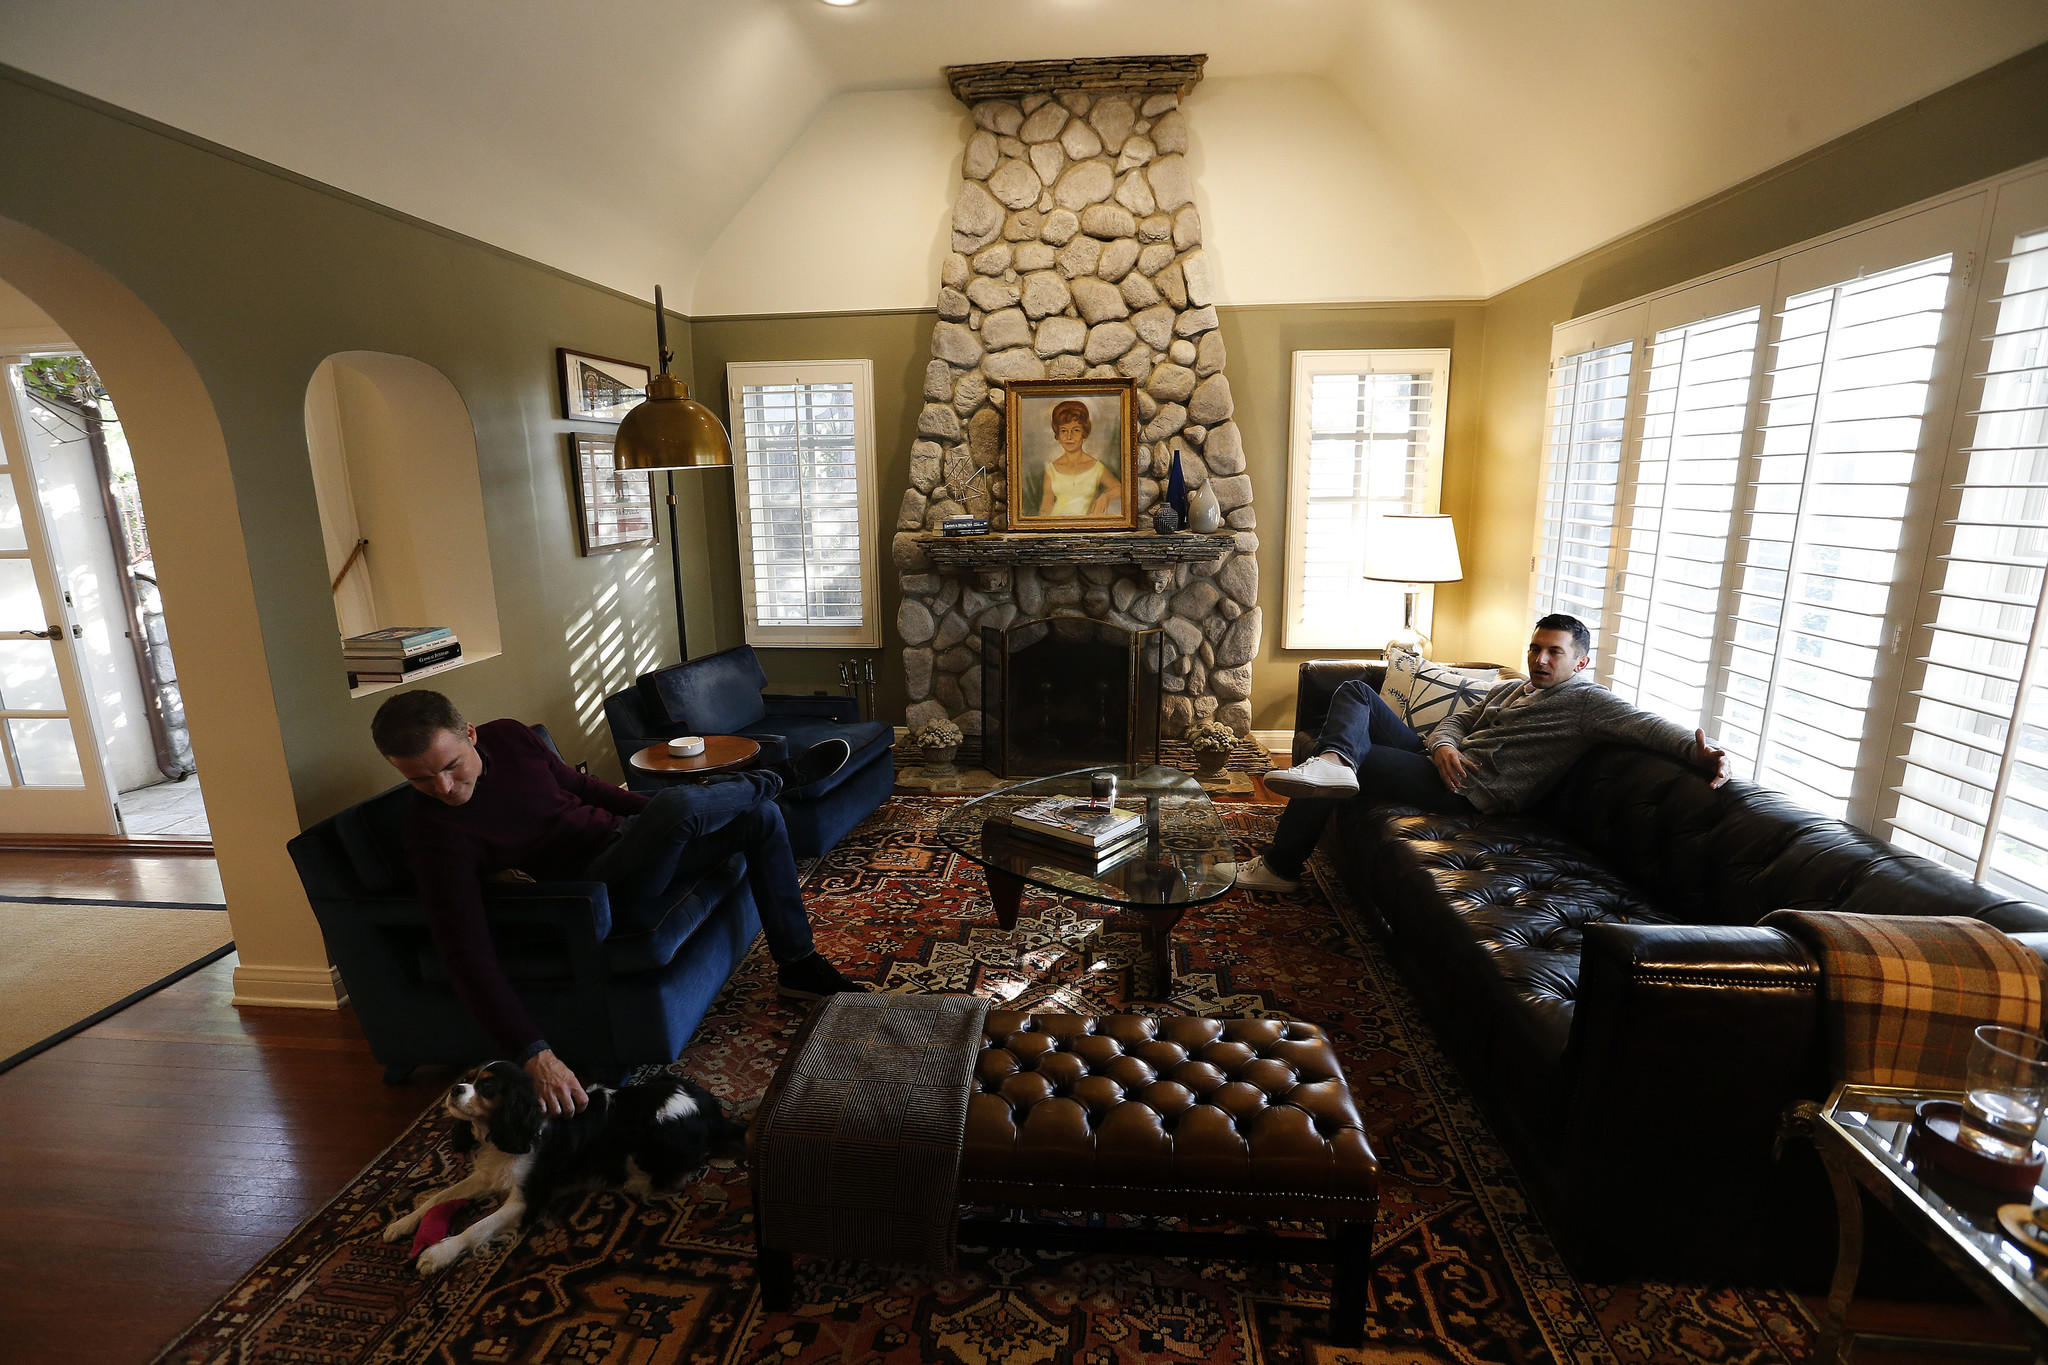 Patrick Wildnauer, left, and his husband Tom Balamaci,  sit inside the living room of their English cottage style home.